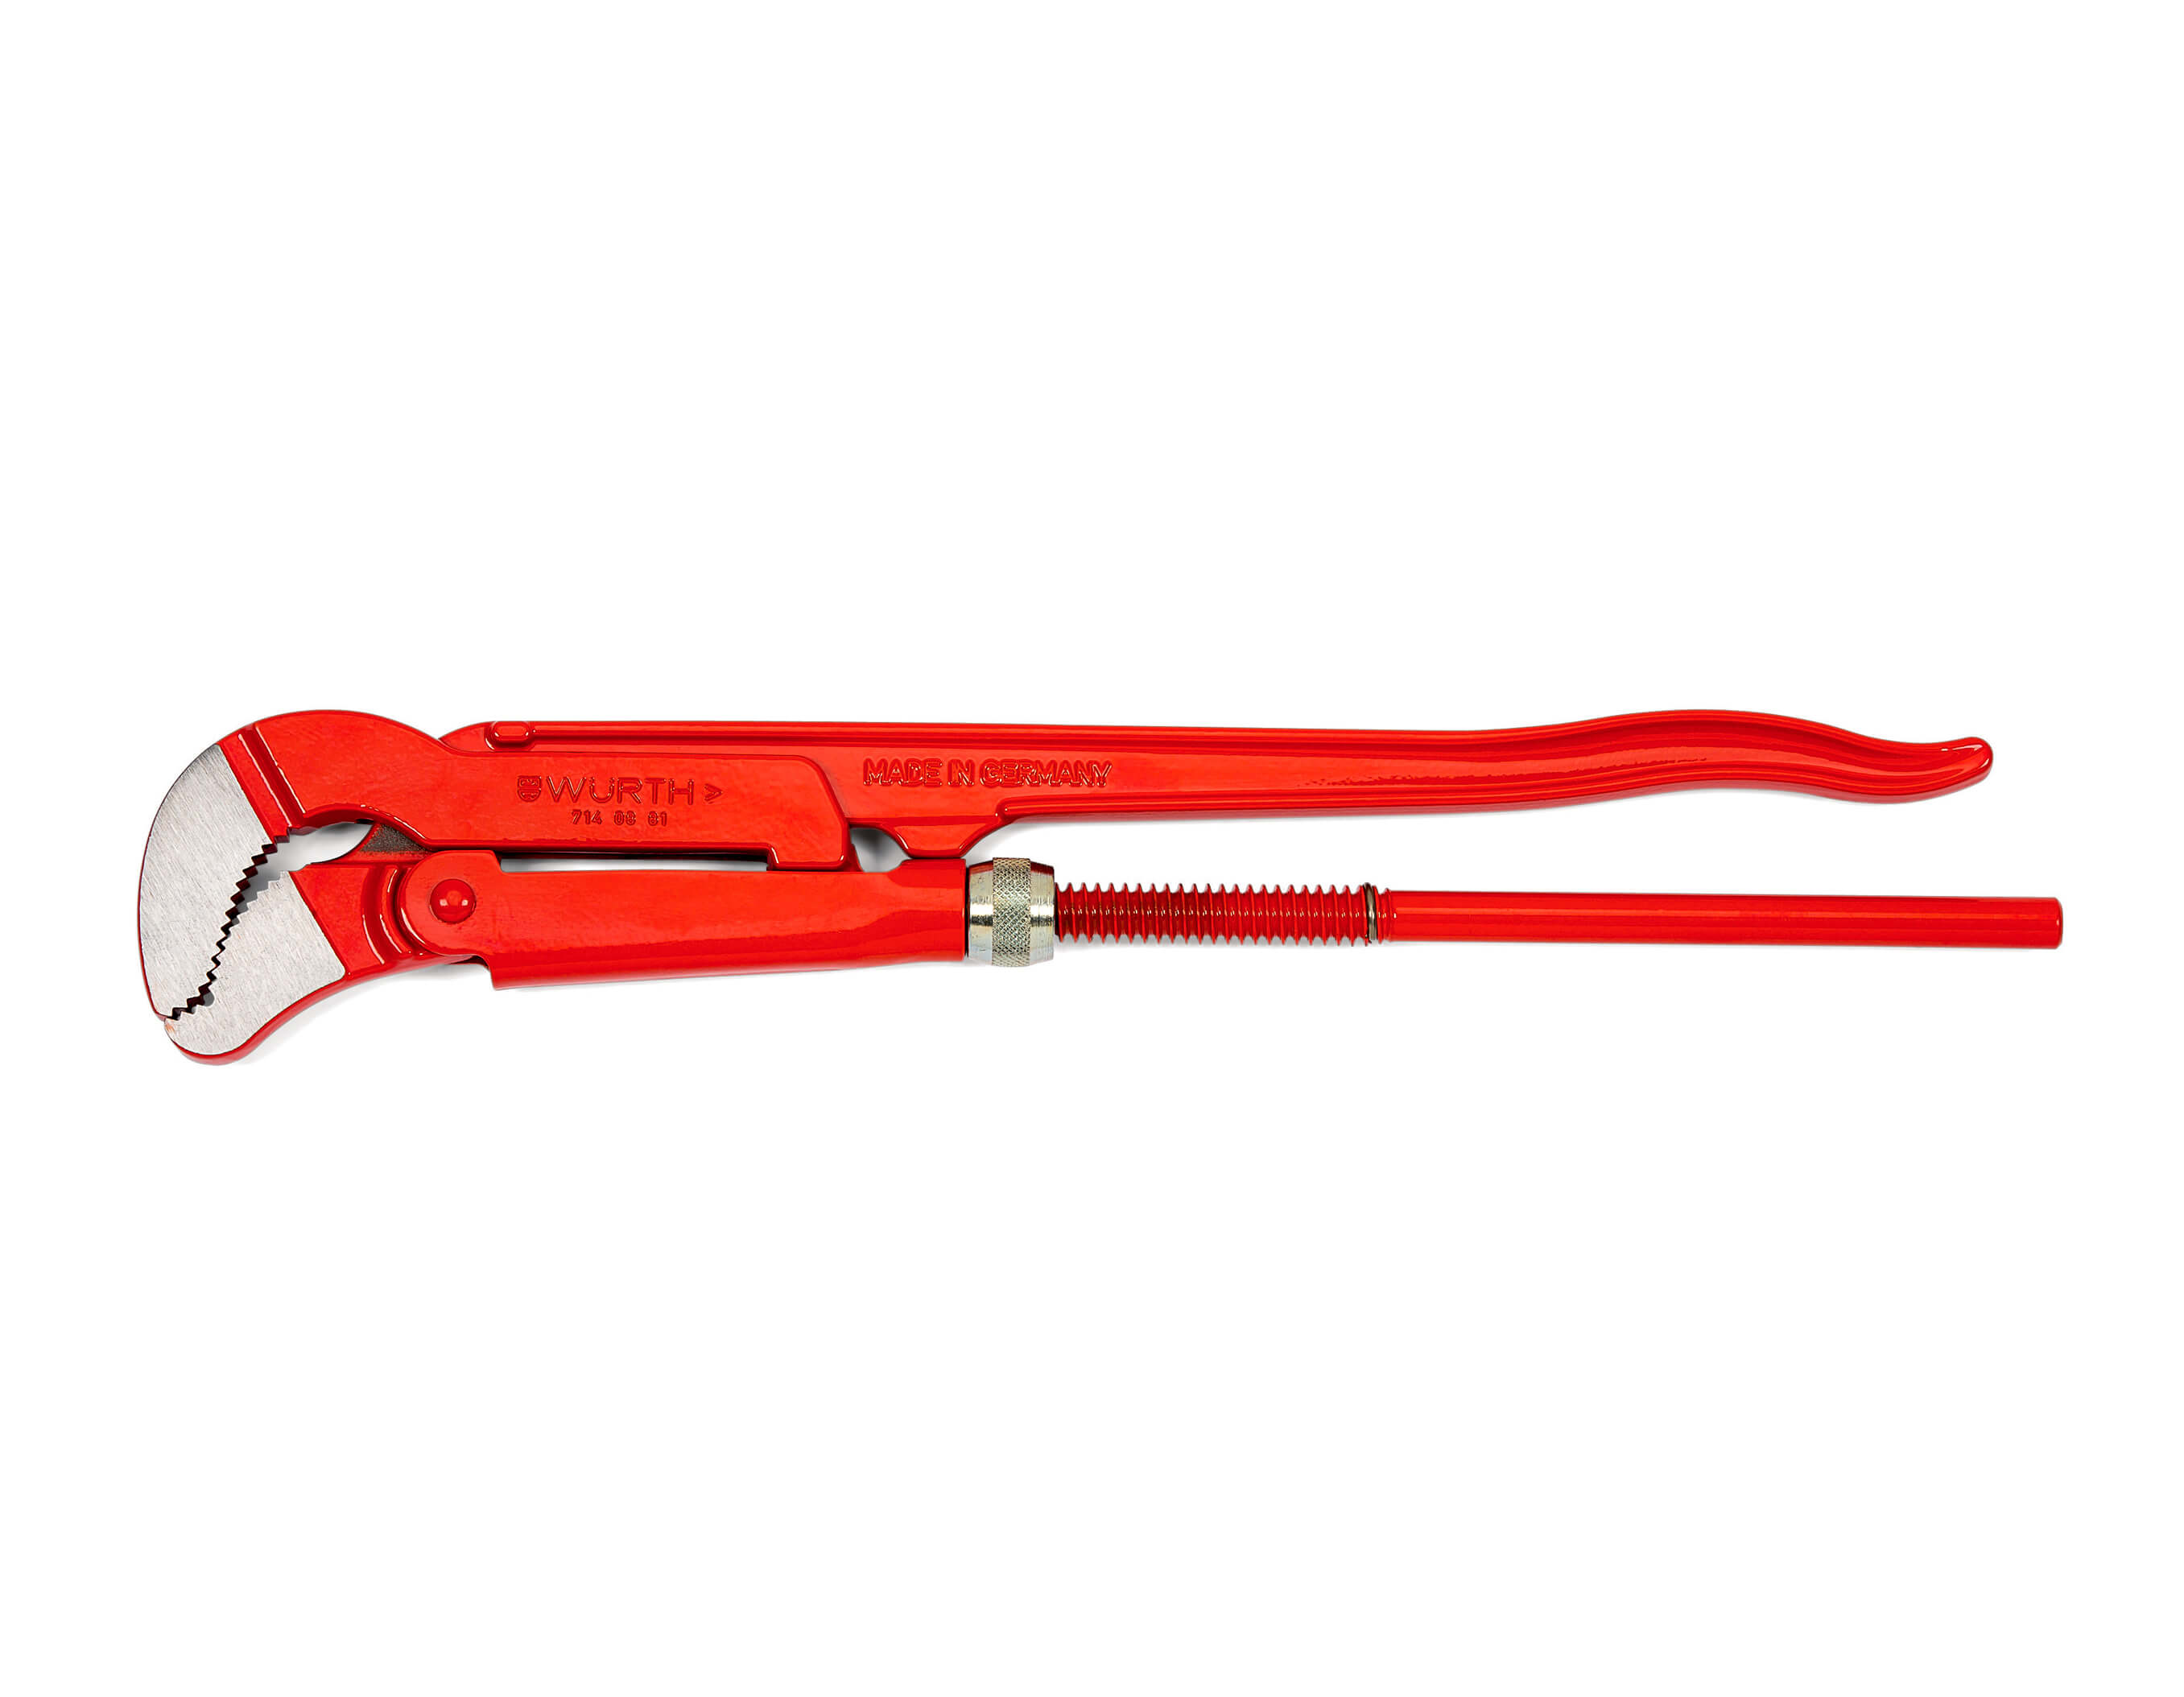 S-jaw corner pipe wrench KNEE-S-2IN